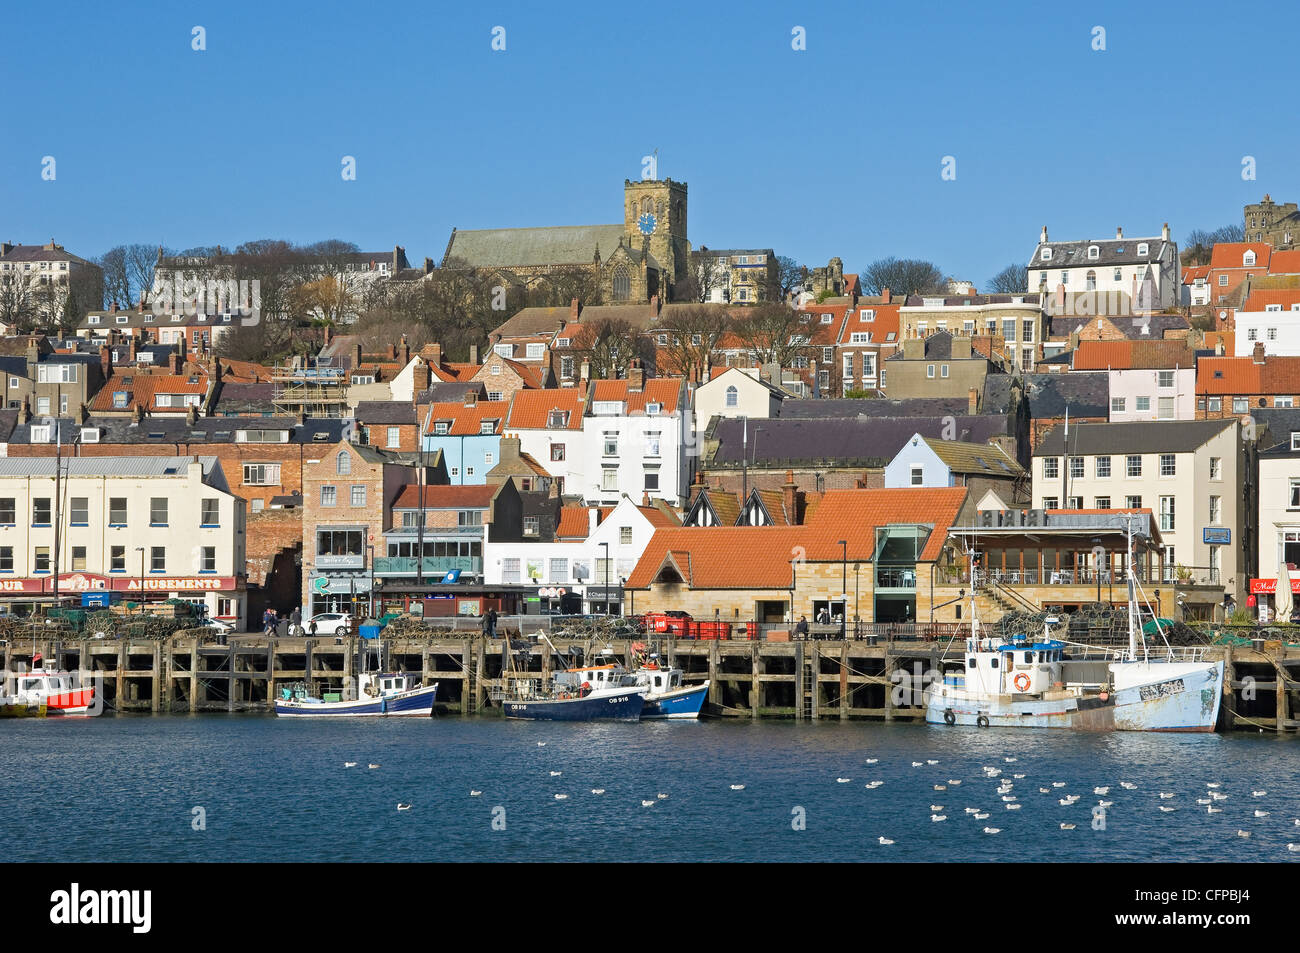 View looking towards the town and fishing boats in winter Scarborough seaside resort Harbour North Yorkshire England UK United Kingdom Great Britain Stock Photo